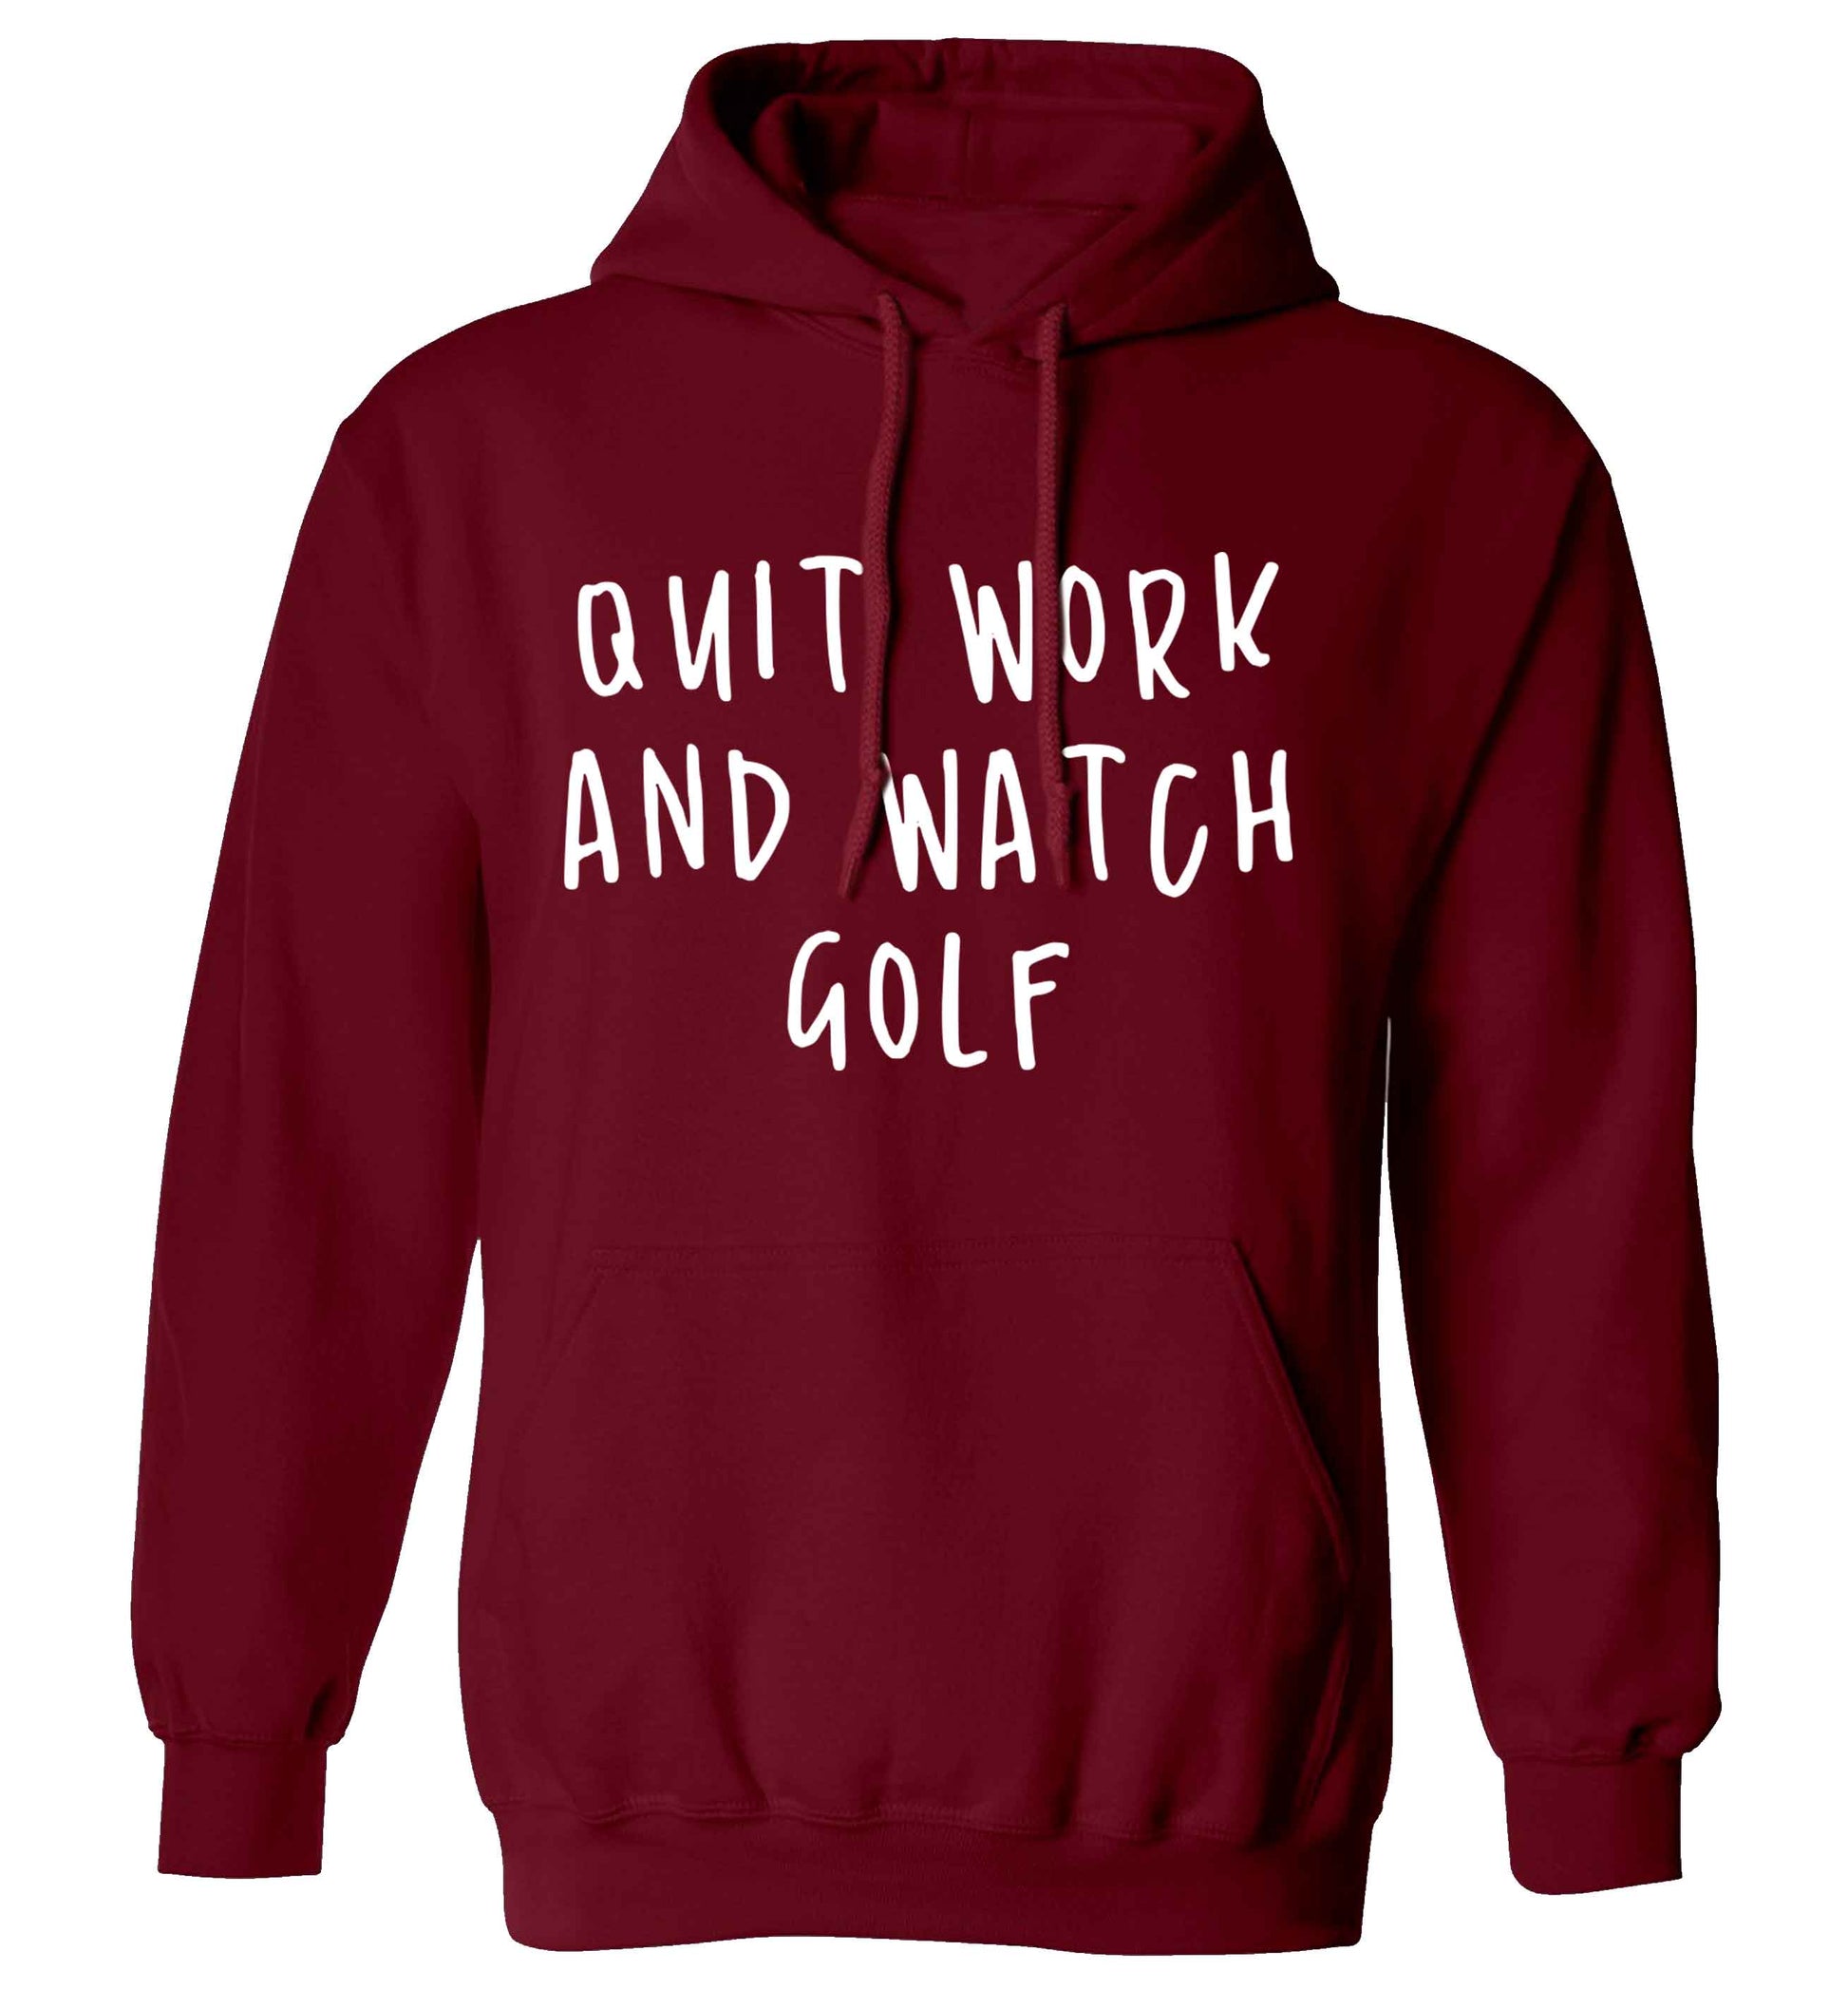 Quit work and watch golf adults unisex maroon hoodie 2XL